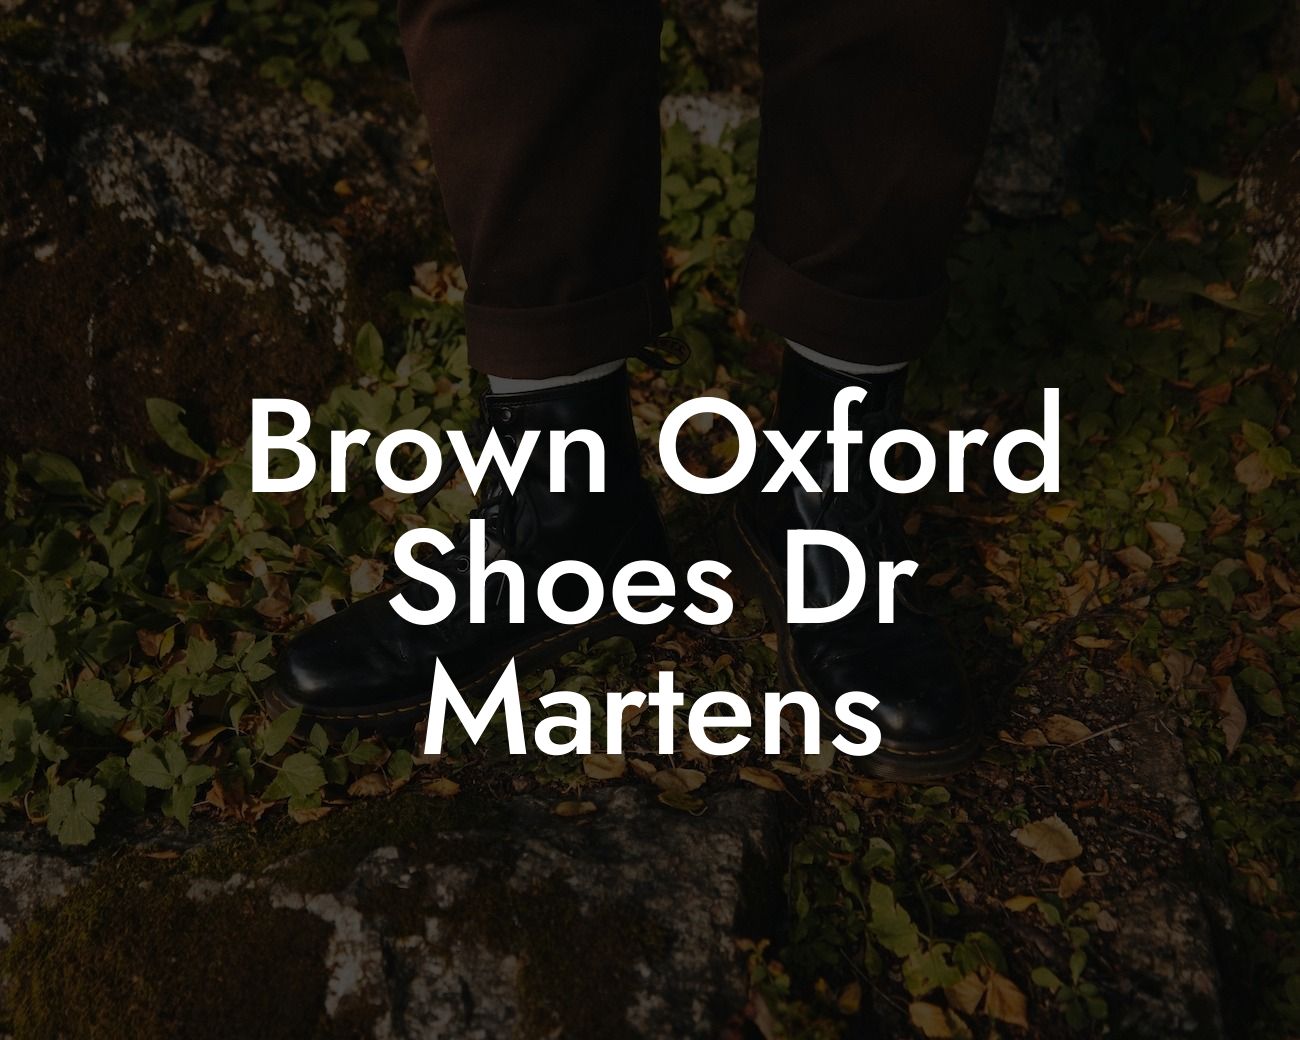 Brown Oxford Shoes Dr Martens